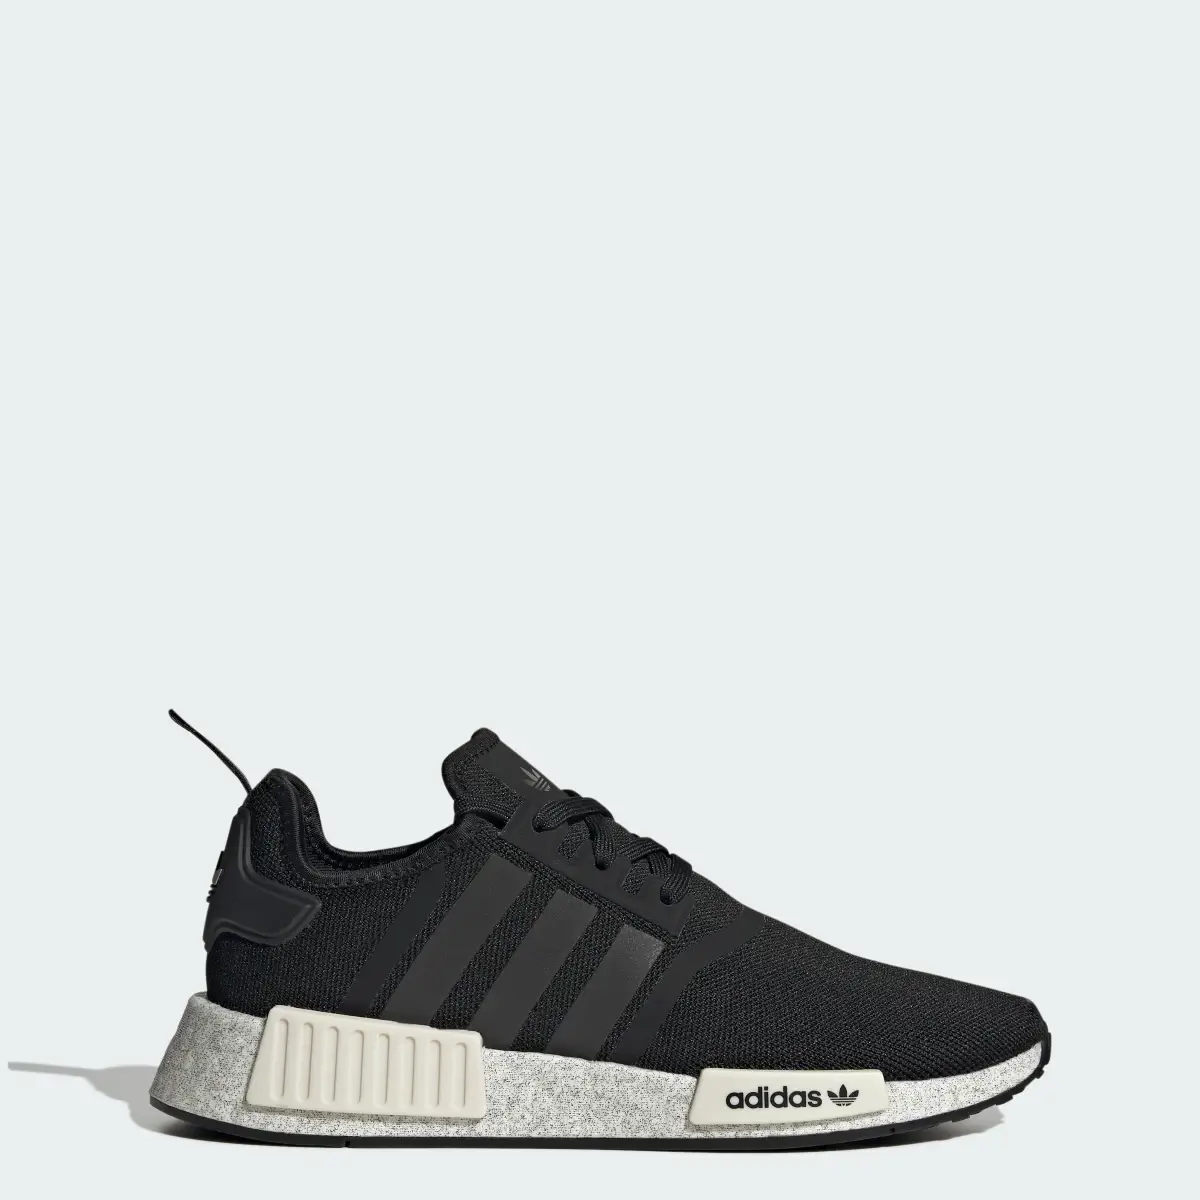 Adidas NMD_R1 Shoes. 1